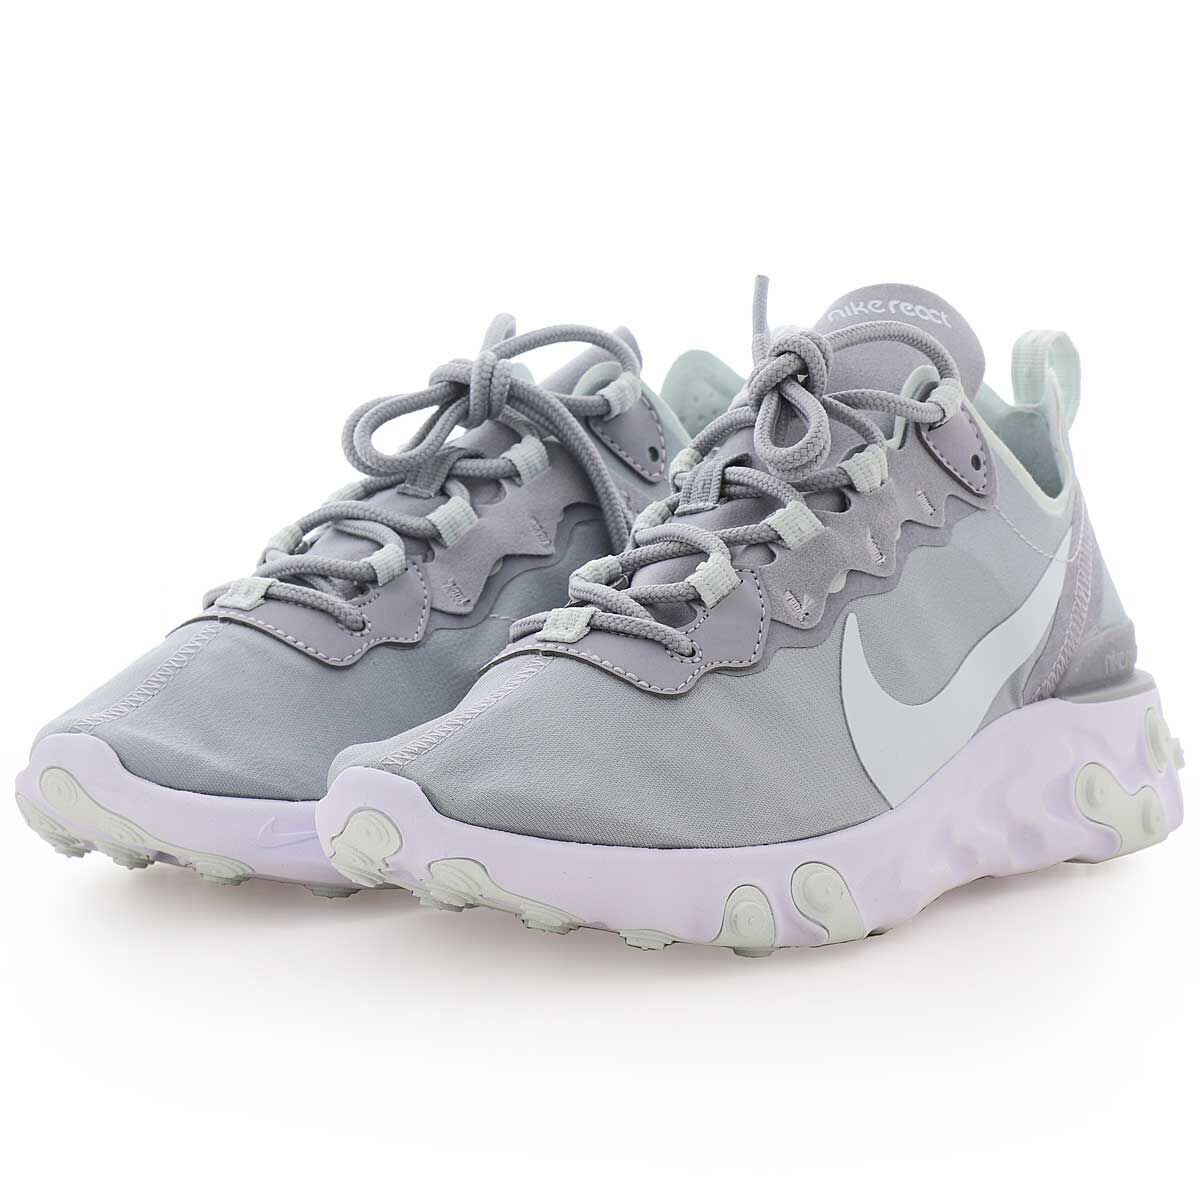 Buy W NIKE REACT ELEMENT 55 for N/A 0.0 